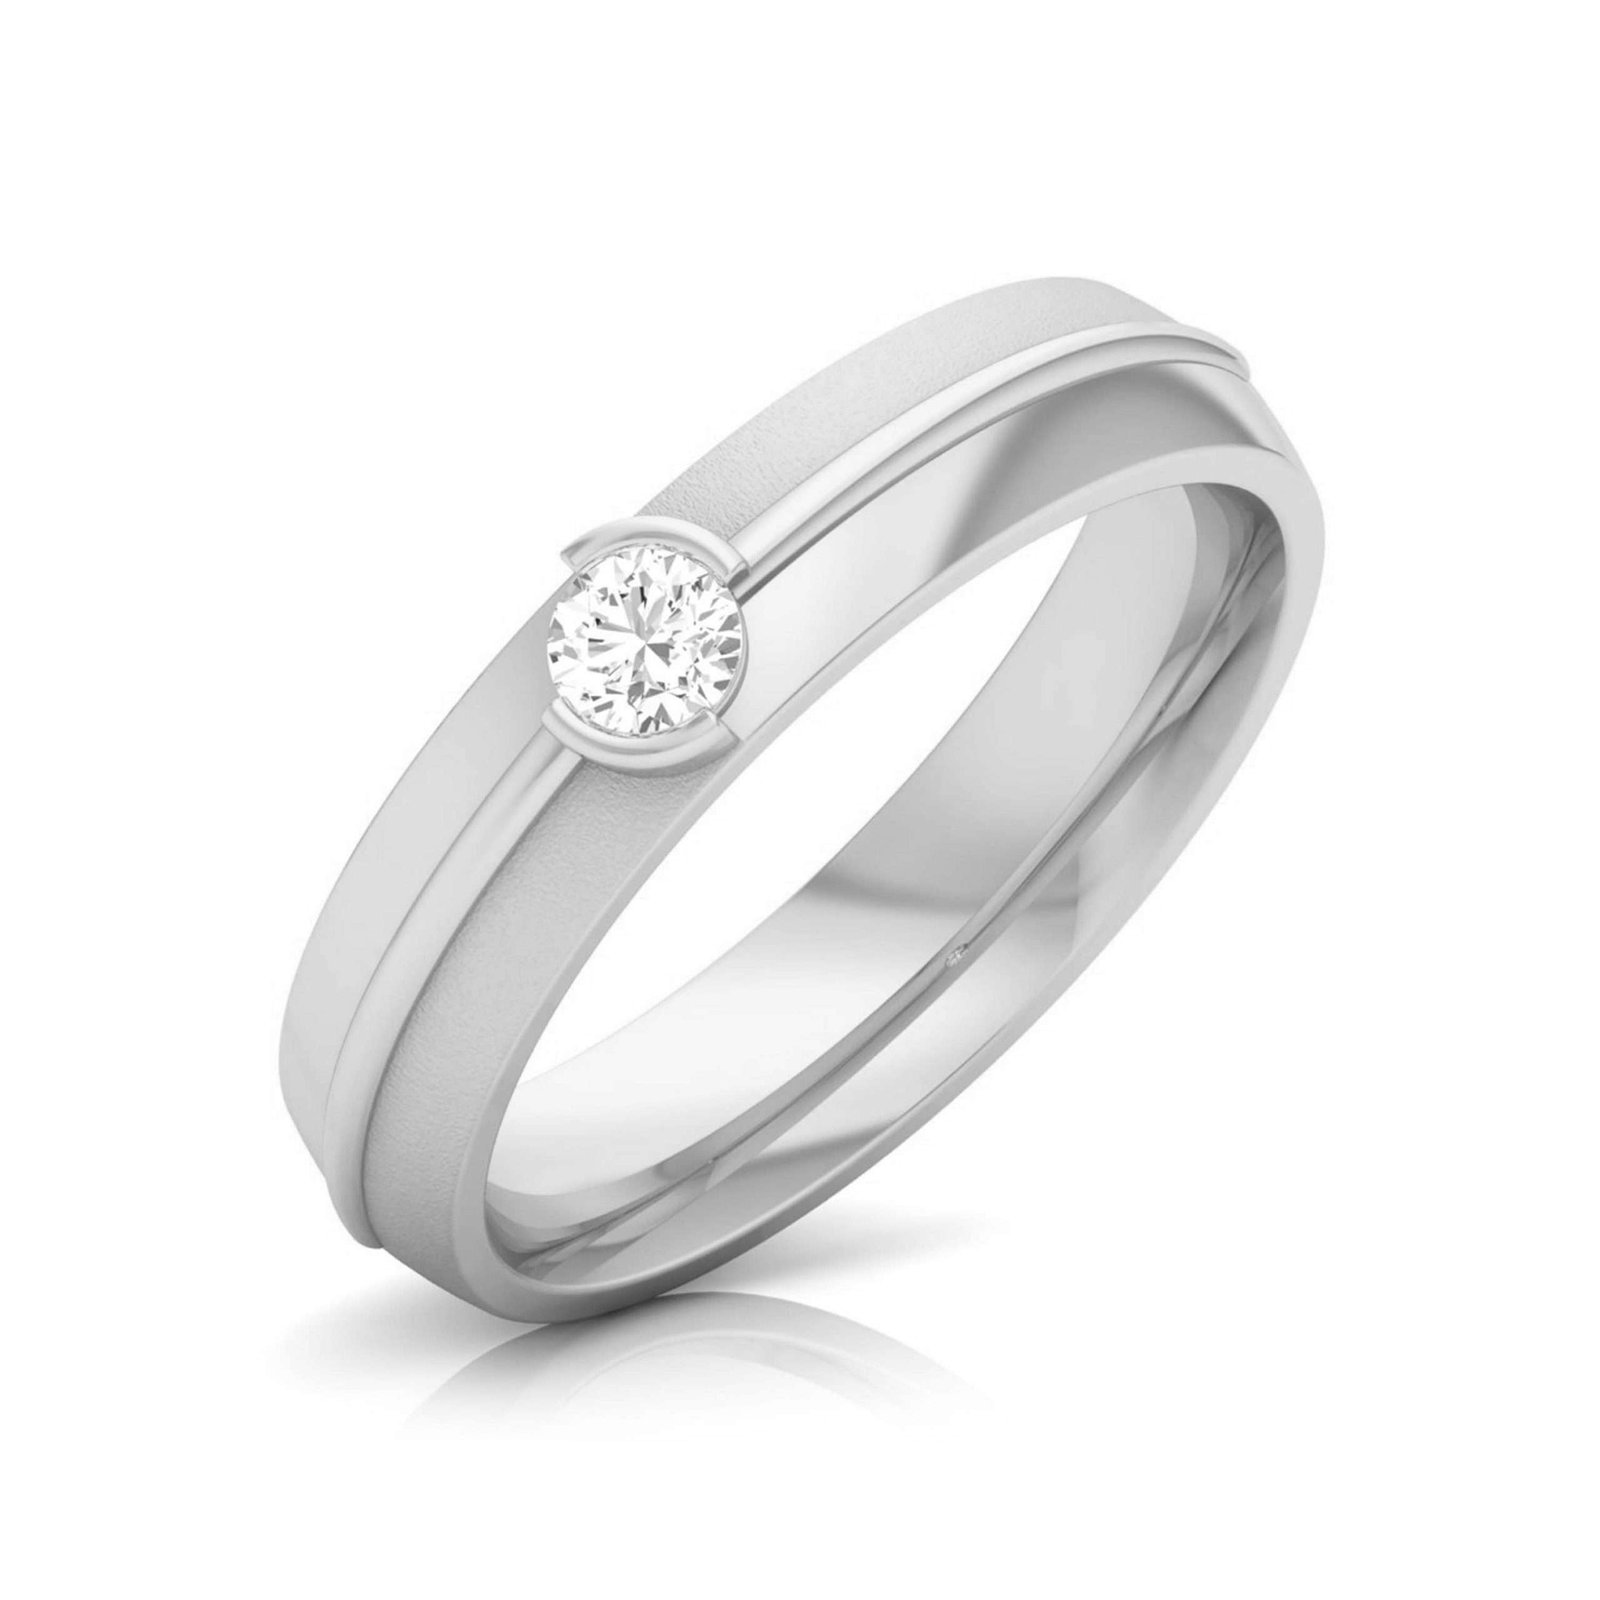 Say Yes Diamond Rings - A31015 – JEWELLERY GRAPHICS